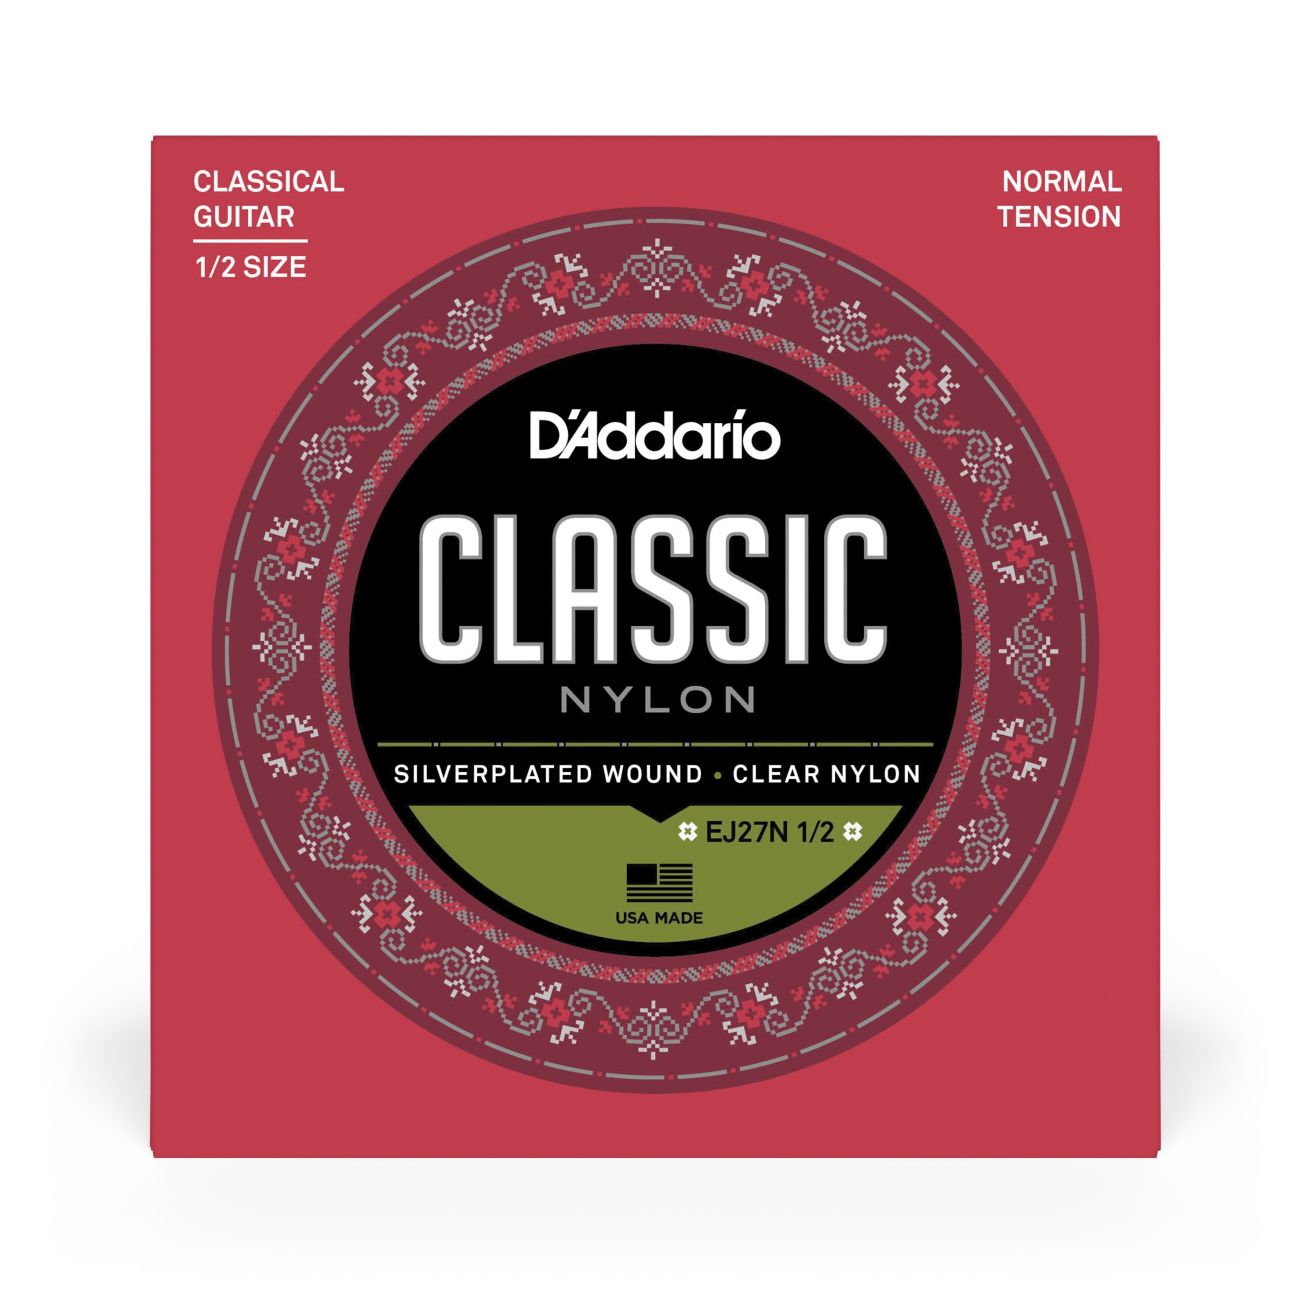 D'Addario EJ27N-1/2 | Classic Nylon Student Classical Guitar Strings | Normal Tension | 1/2 Size